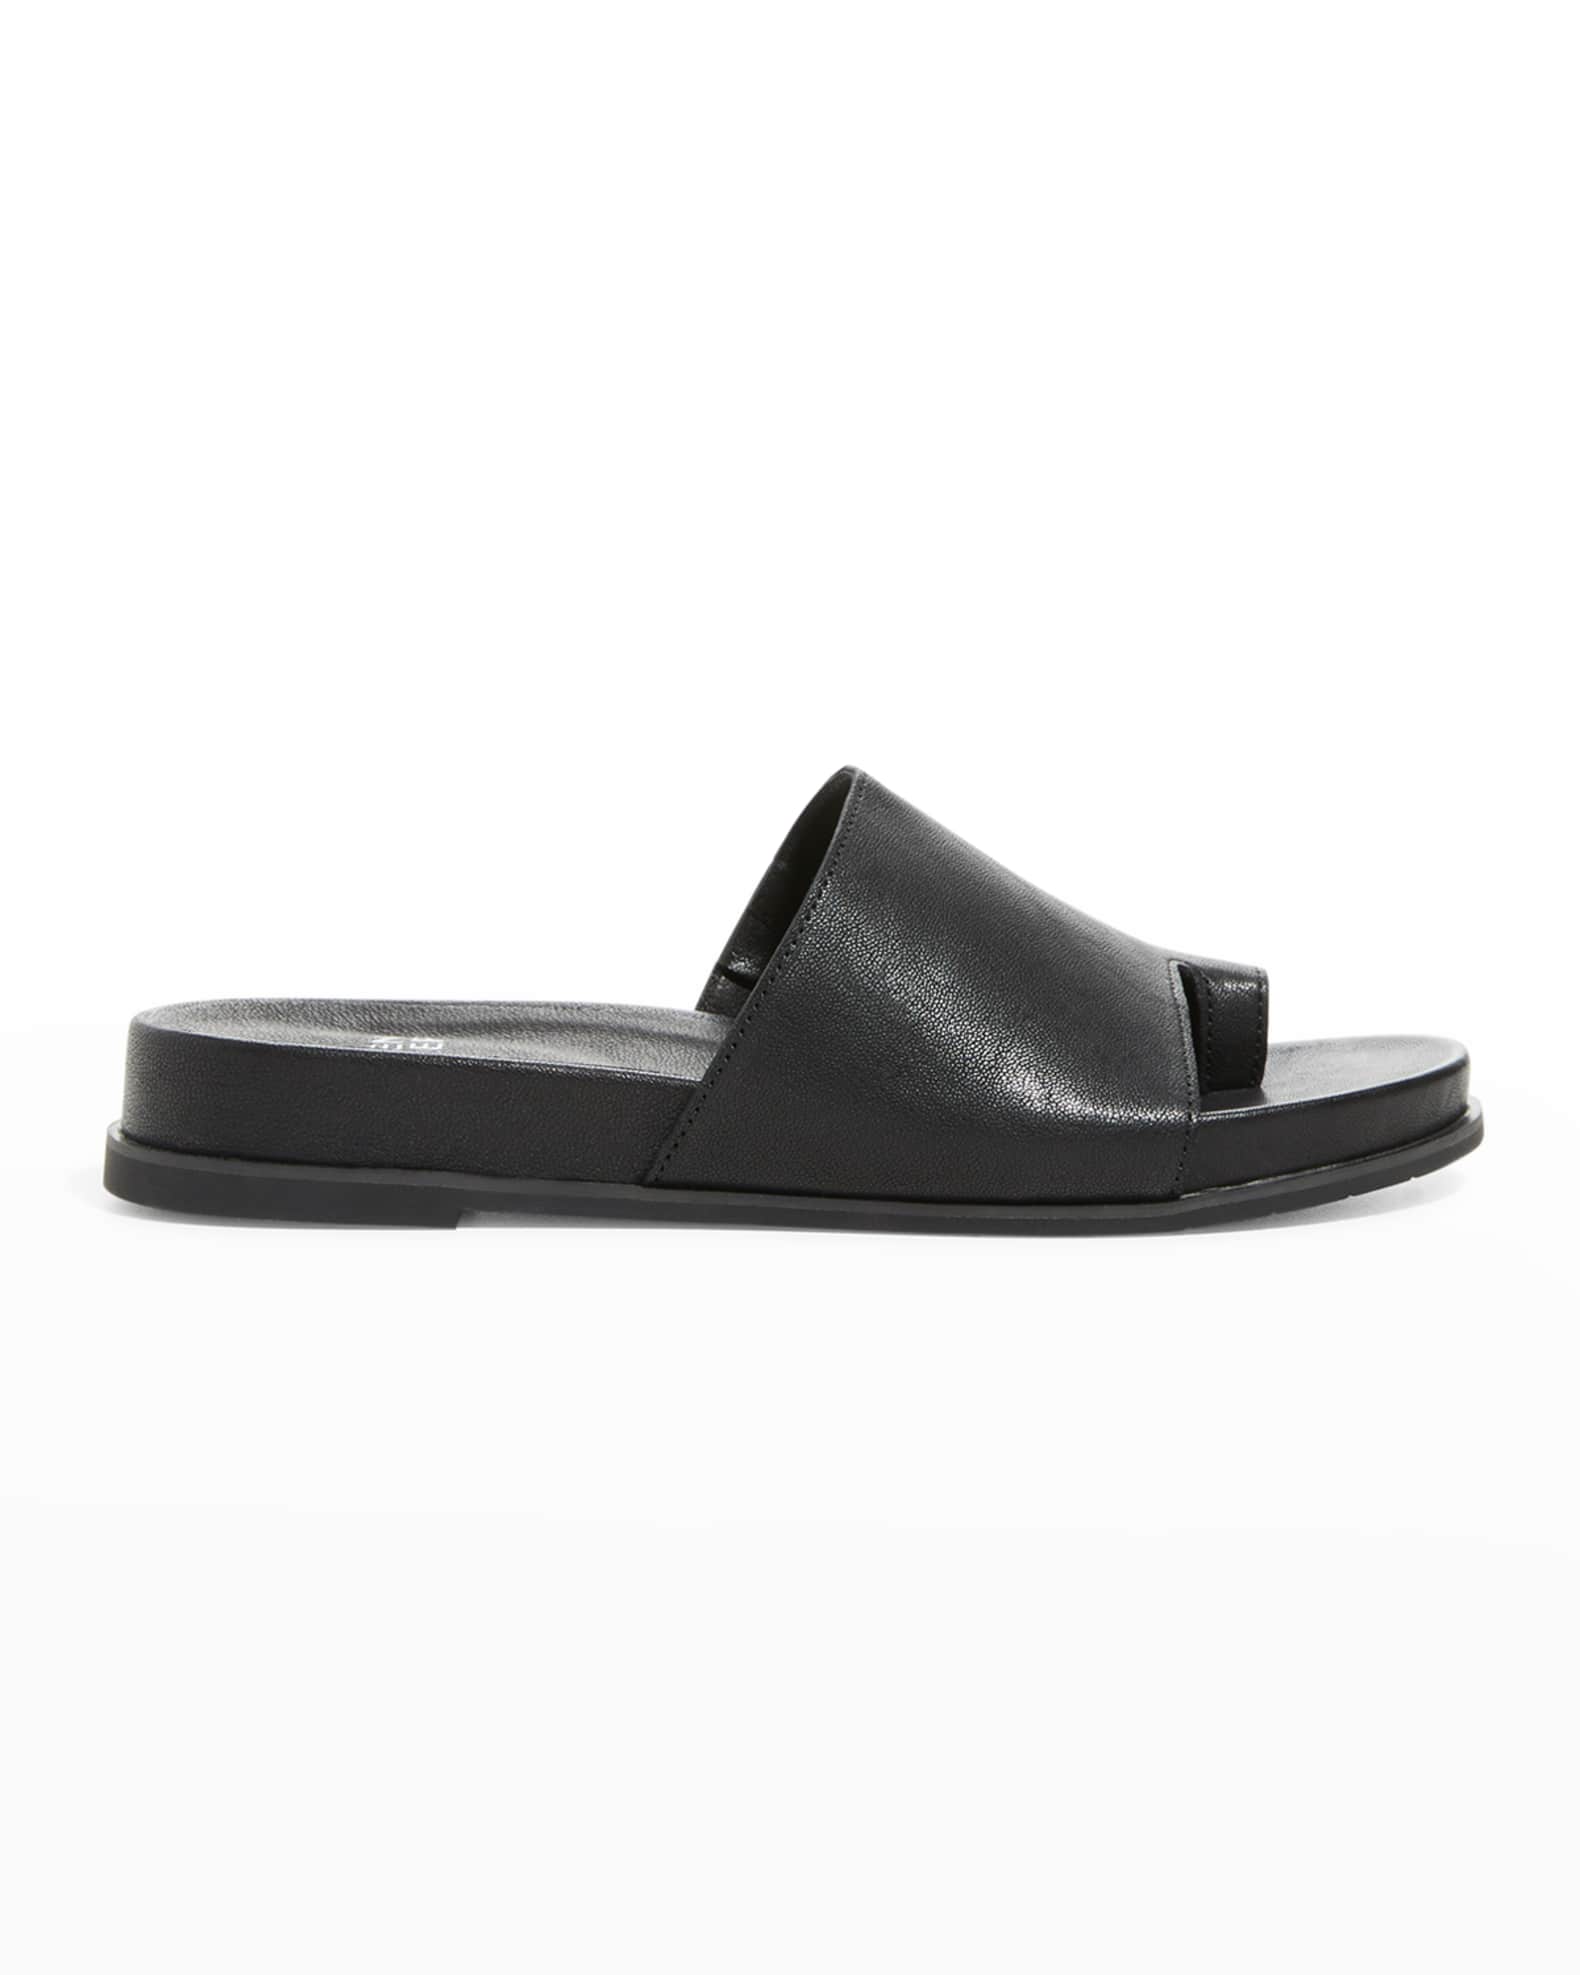 Eileen Fisher Leather Toe-Ring Slide Sandals | Neiman Marcus